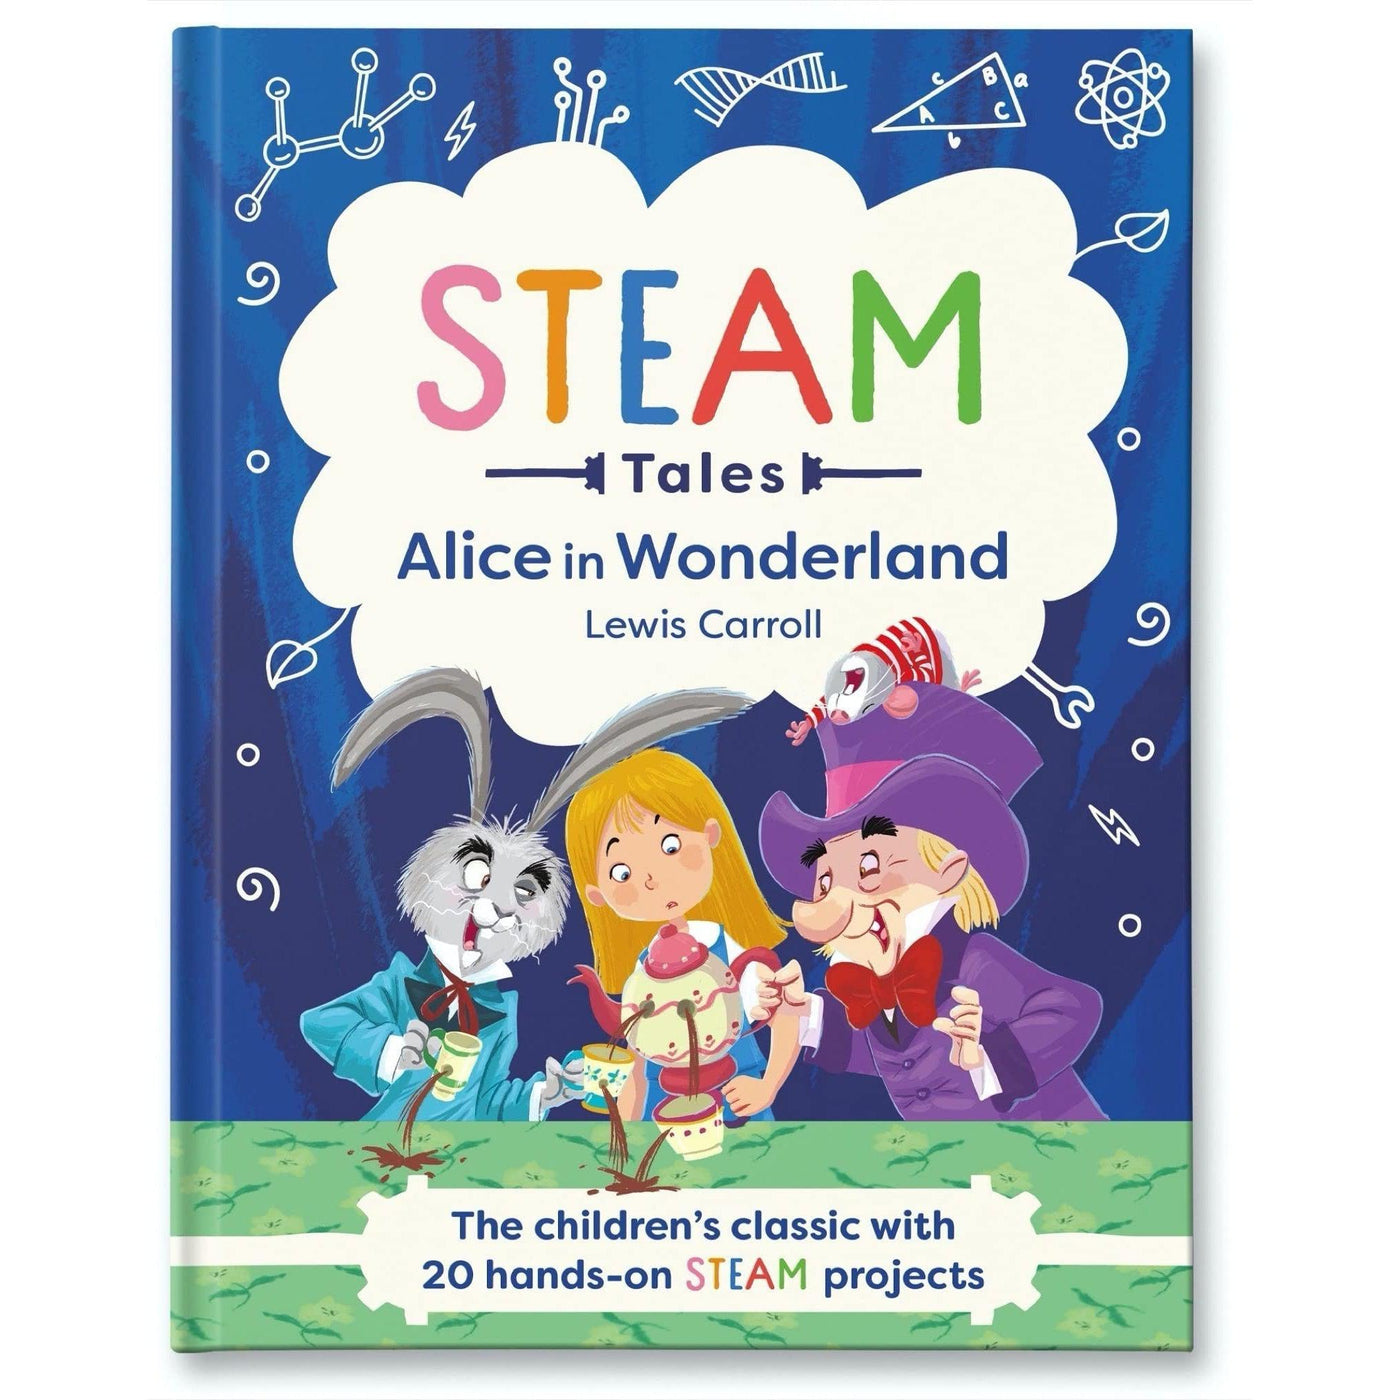 Alice In Wonderland : The Children's Classic With 20 Hands-On Steam Projects (Steam Tales) - Lewis Carroll & Katie Dicker